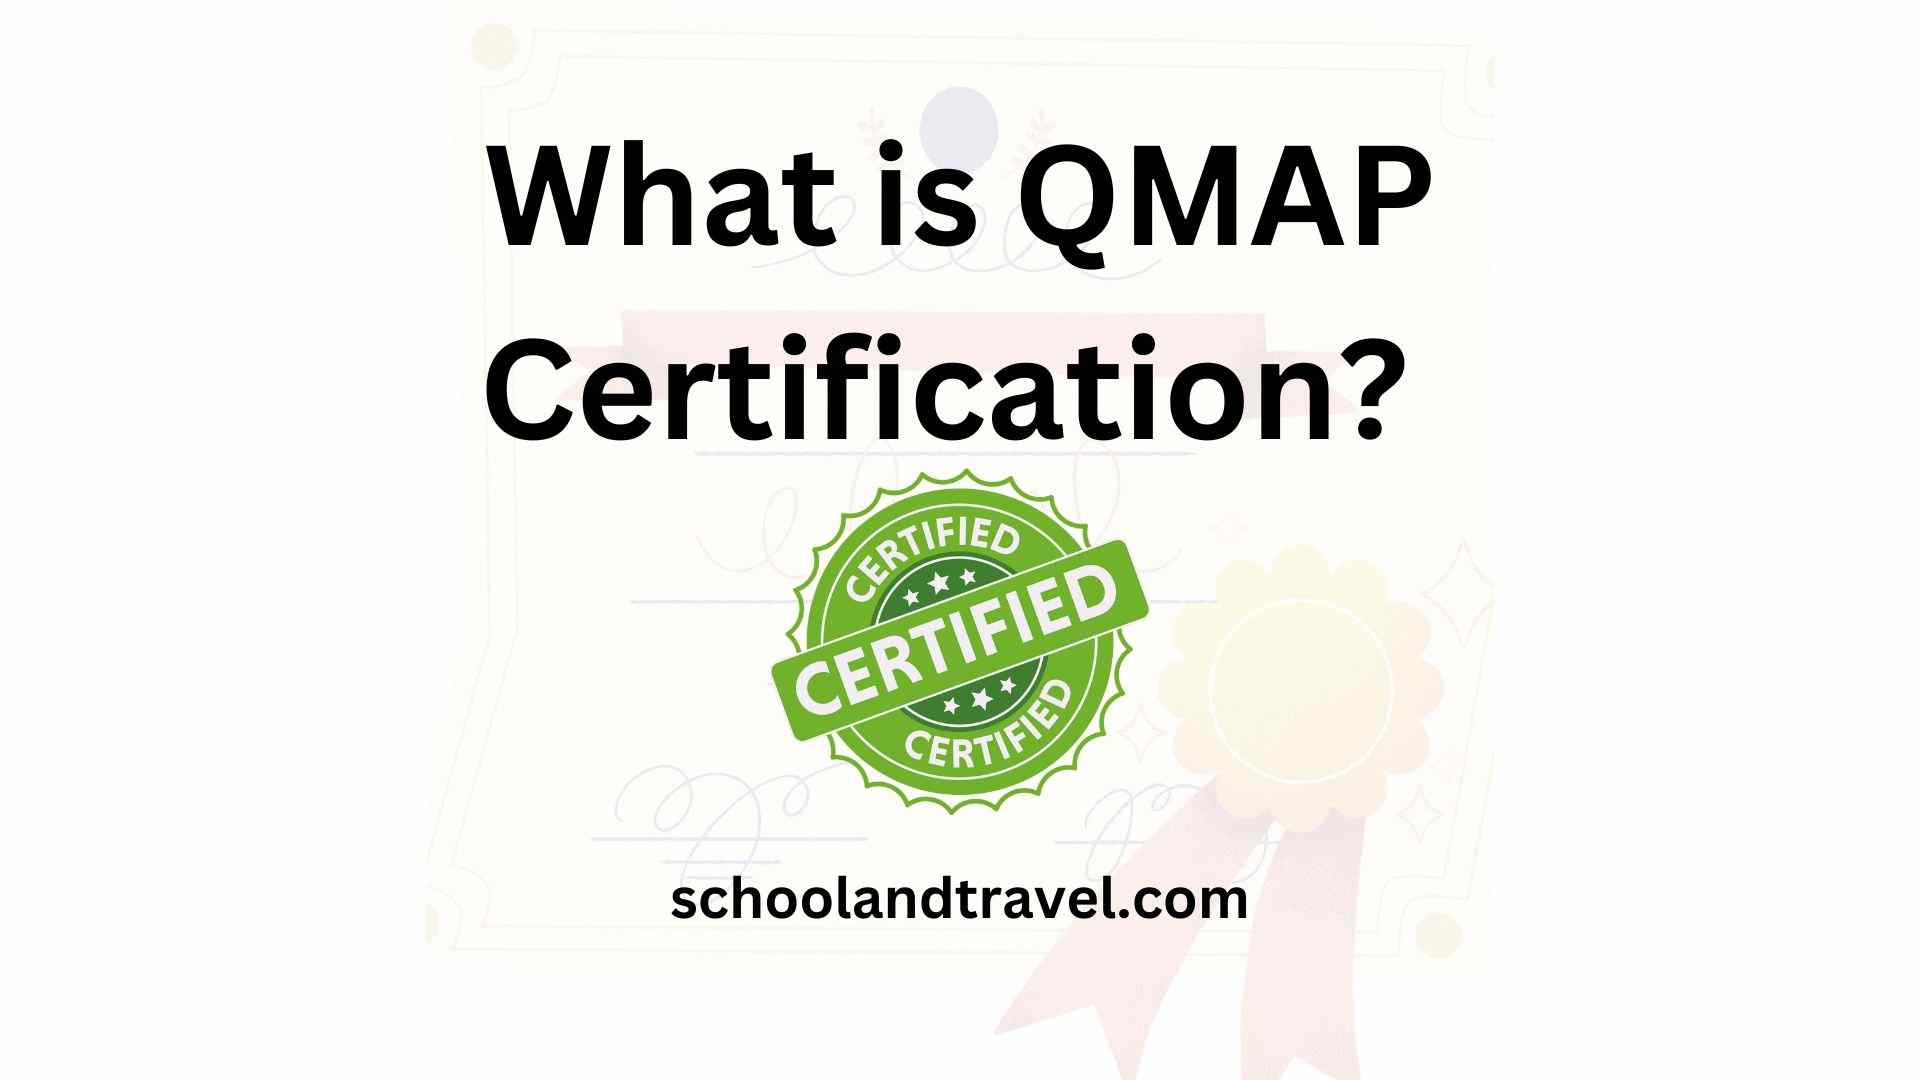 What is QMAP Certification? How to Get it (Steps Alt FAQs)